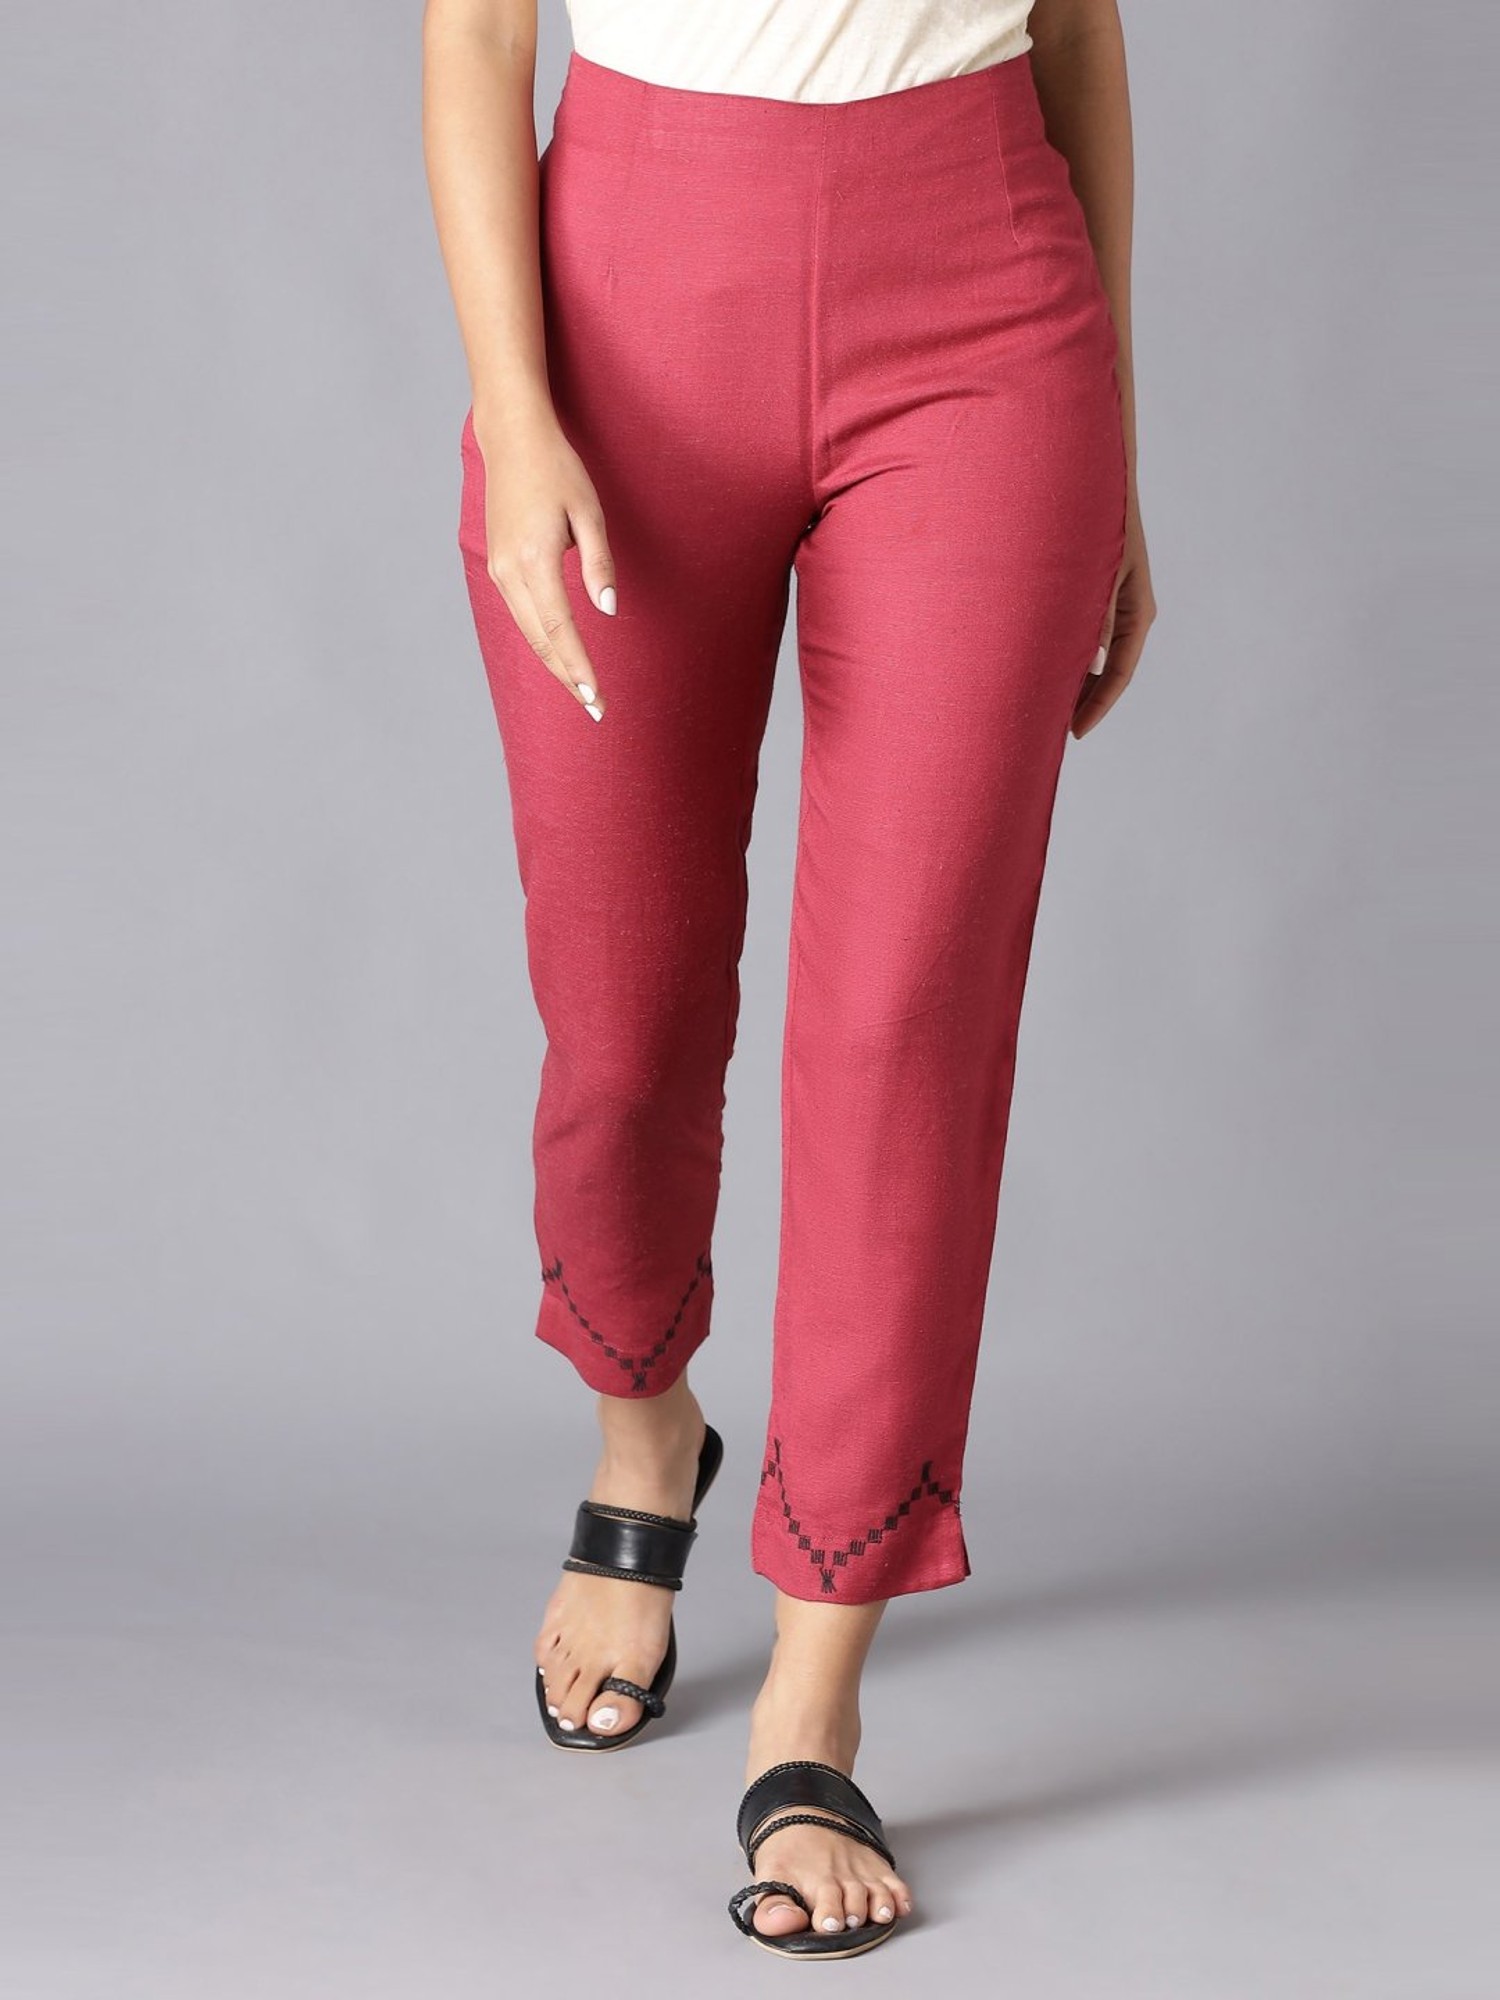 Tomato red flare bootcut pants & trousers for women casual and office wear.